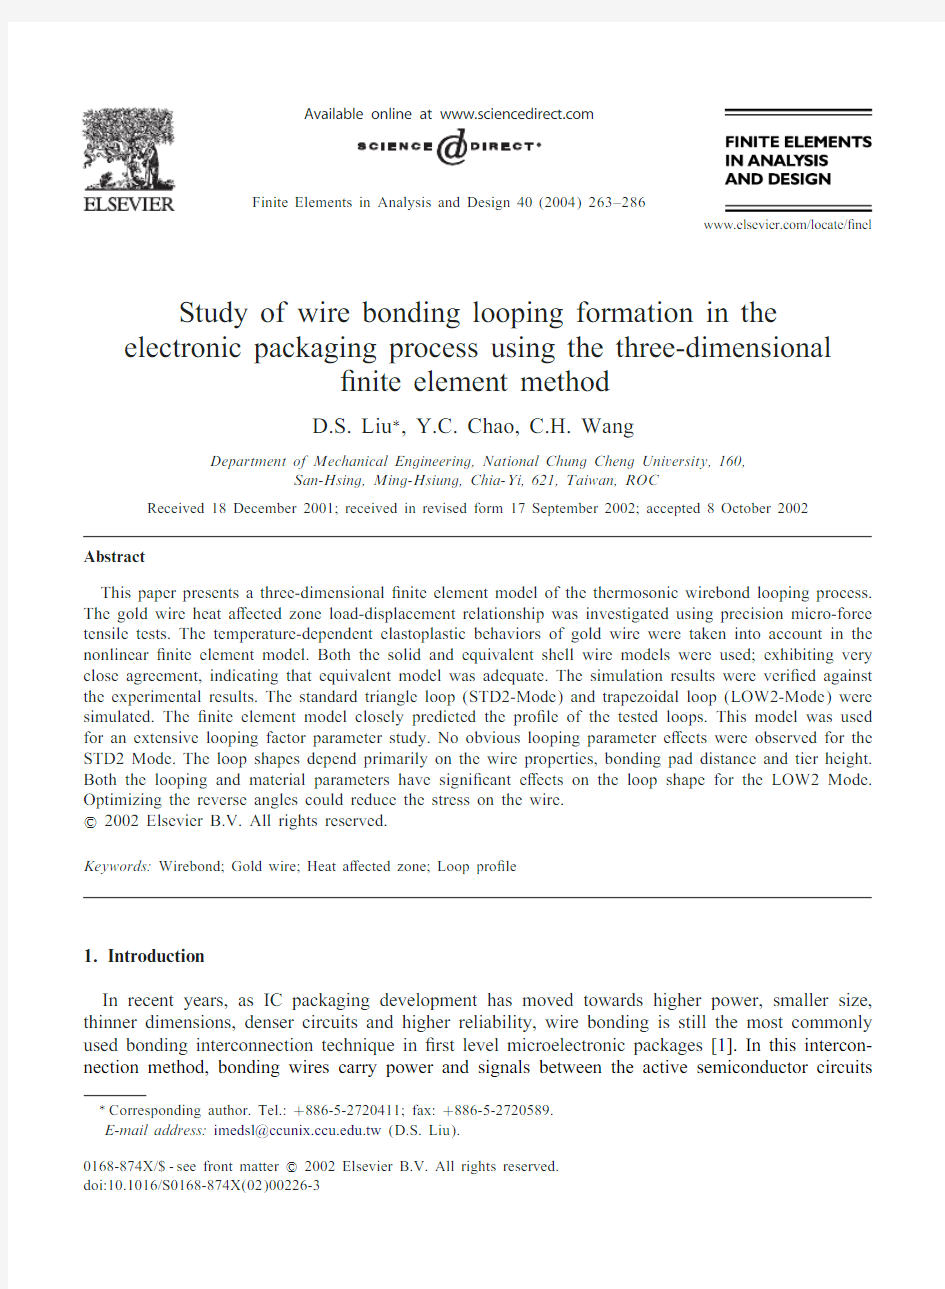 Study of wire bonding looping formation in the electronic packaging process using the three-dimen